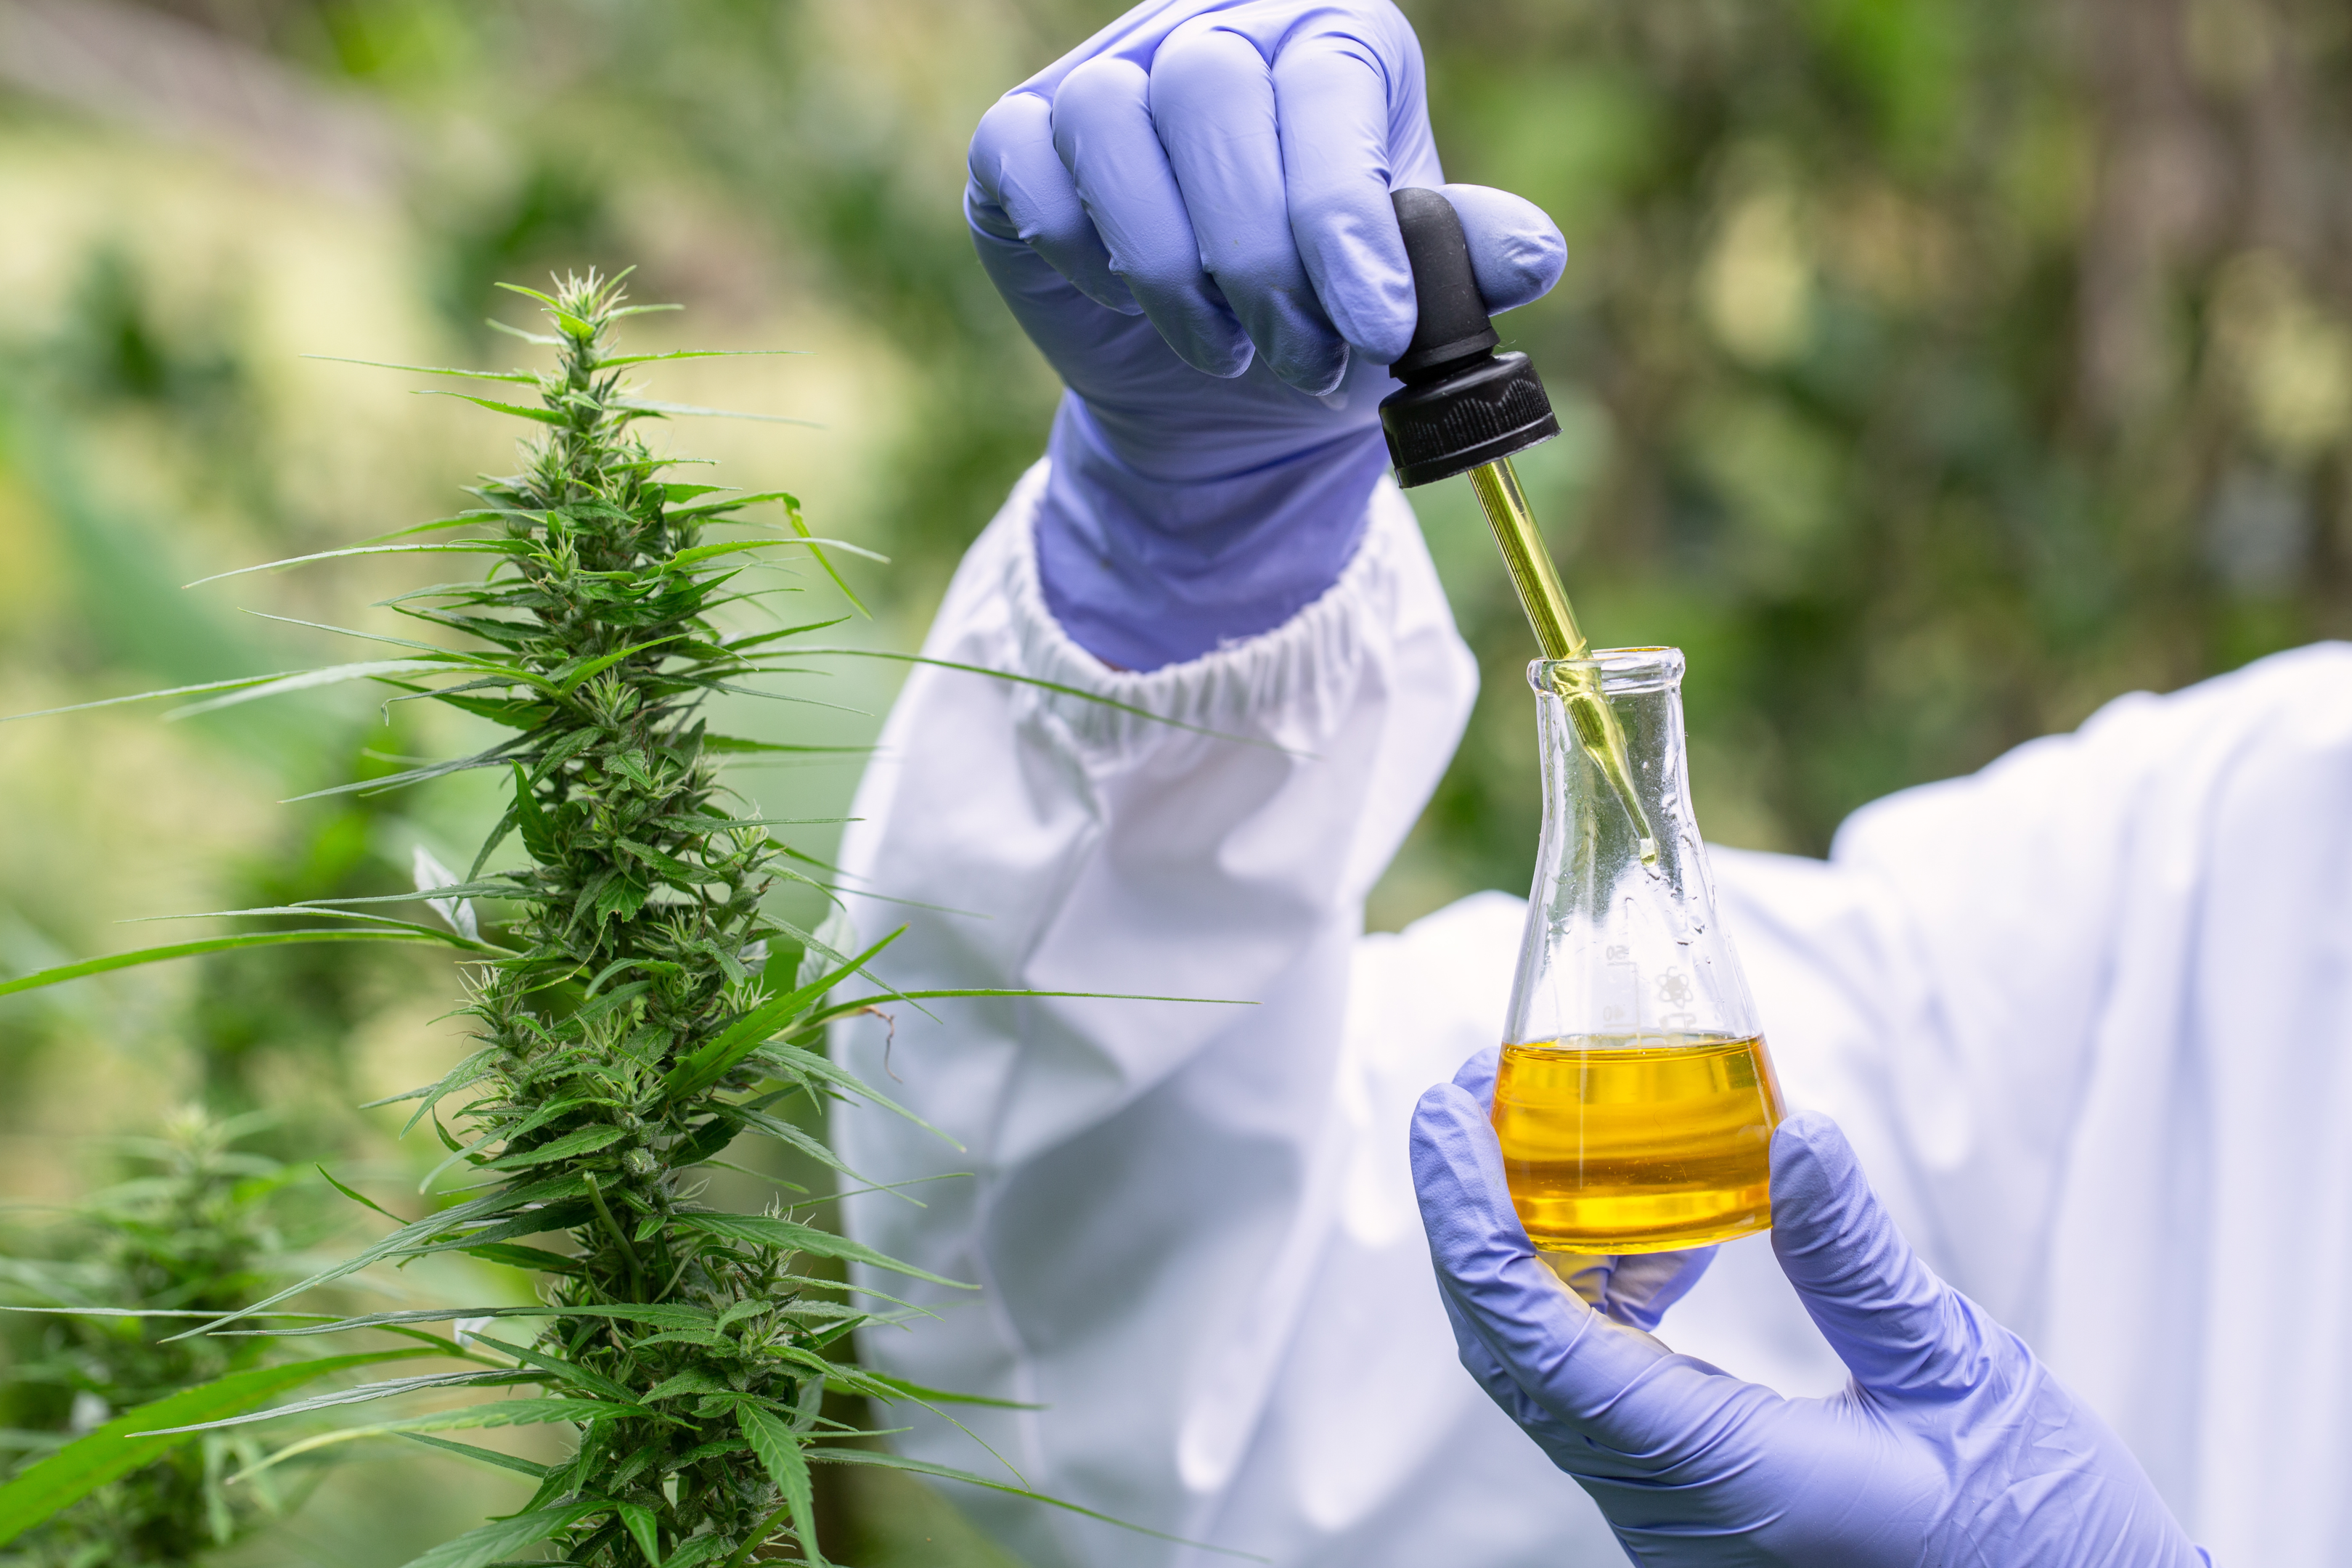 CBD oil for a CBD tincture is made through extracting the chemical compound from the cannabis plant.  CBD oil for our CBD tinctures comes from USA, organically grown hemp plants.